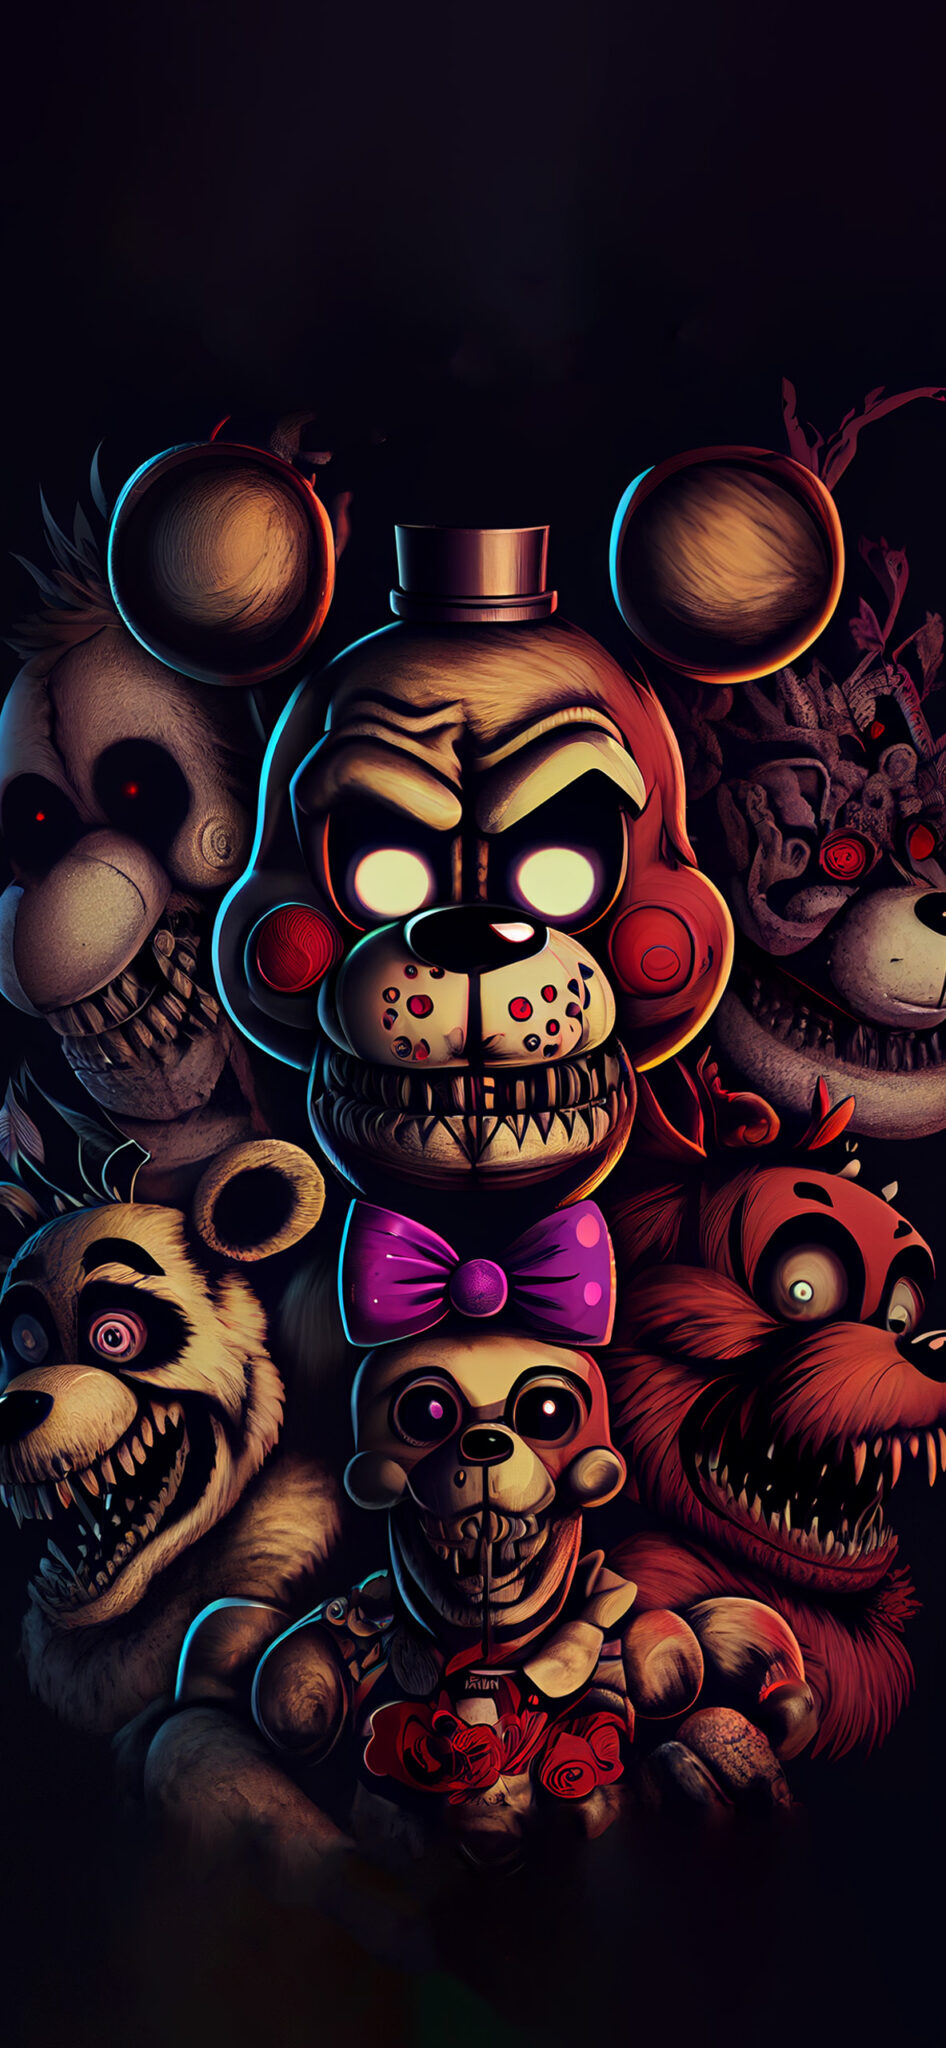 Scary Fnaf Wallpaper Five Nights At Freddys Wallpaper Iphone 6251